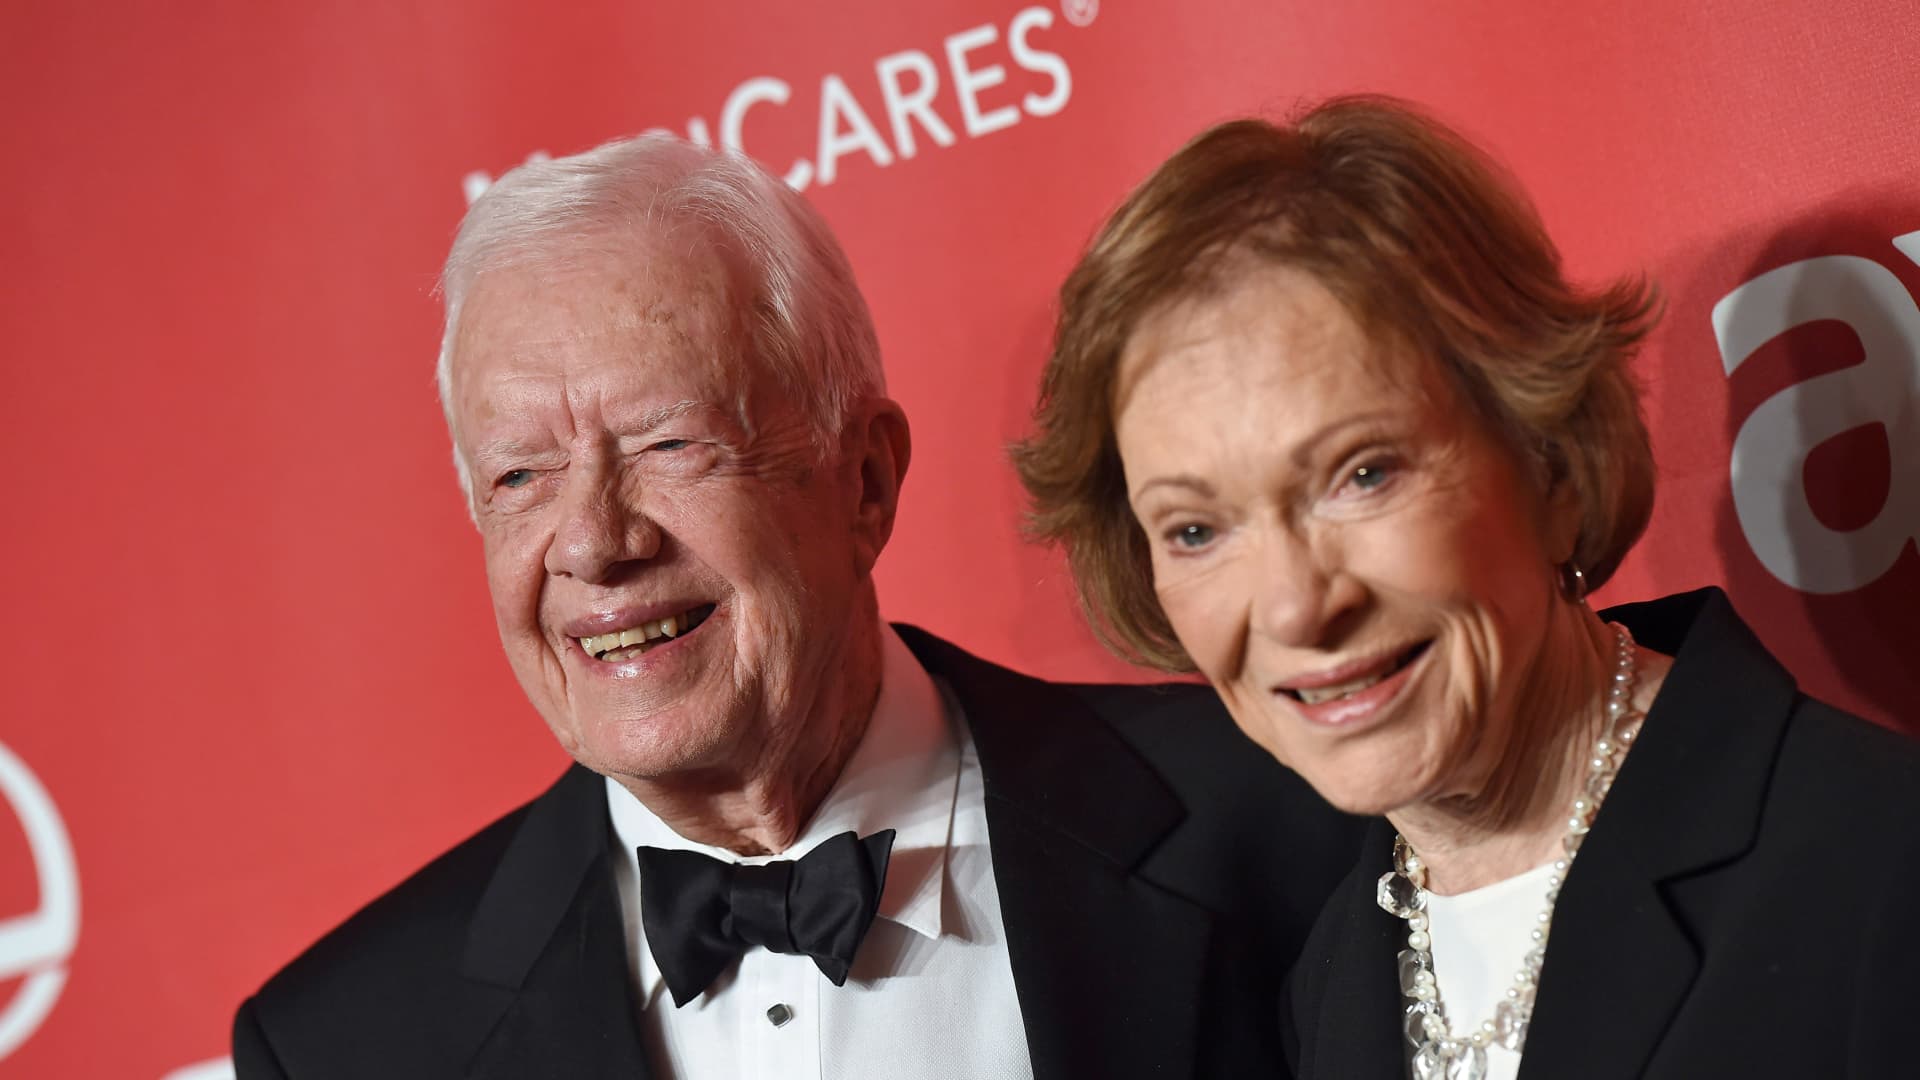 LOS ANGELES, CA - FEBRUARY 06:Former President Jimmy Carter (L) and wife Rosalynn Carter arrive at the 2015 MusiCares Person of The Year honoring Bob Dylan at Los Angeles Convention Center on February 6, 2015 in Los Angeles, California.(Photo by Axelle/Bauer-Griffin/FilmMagic)